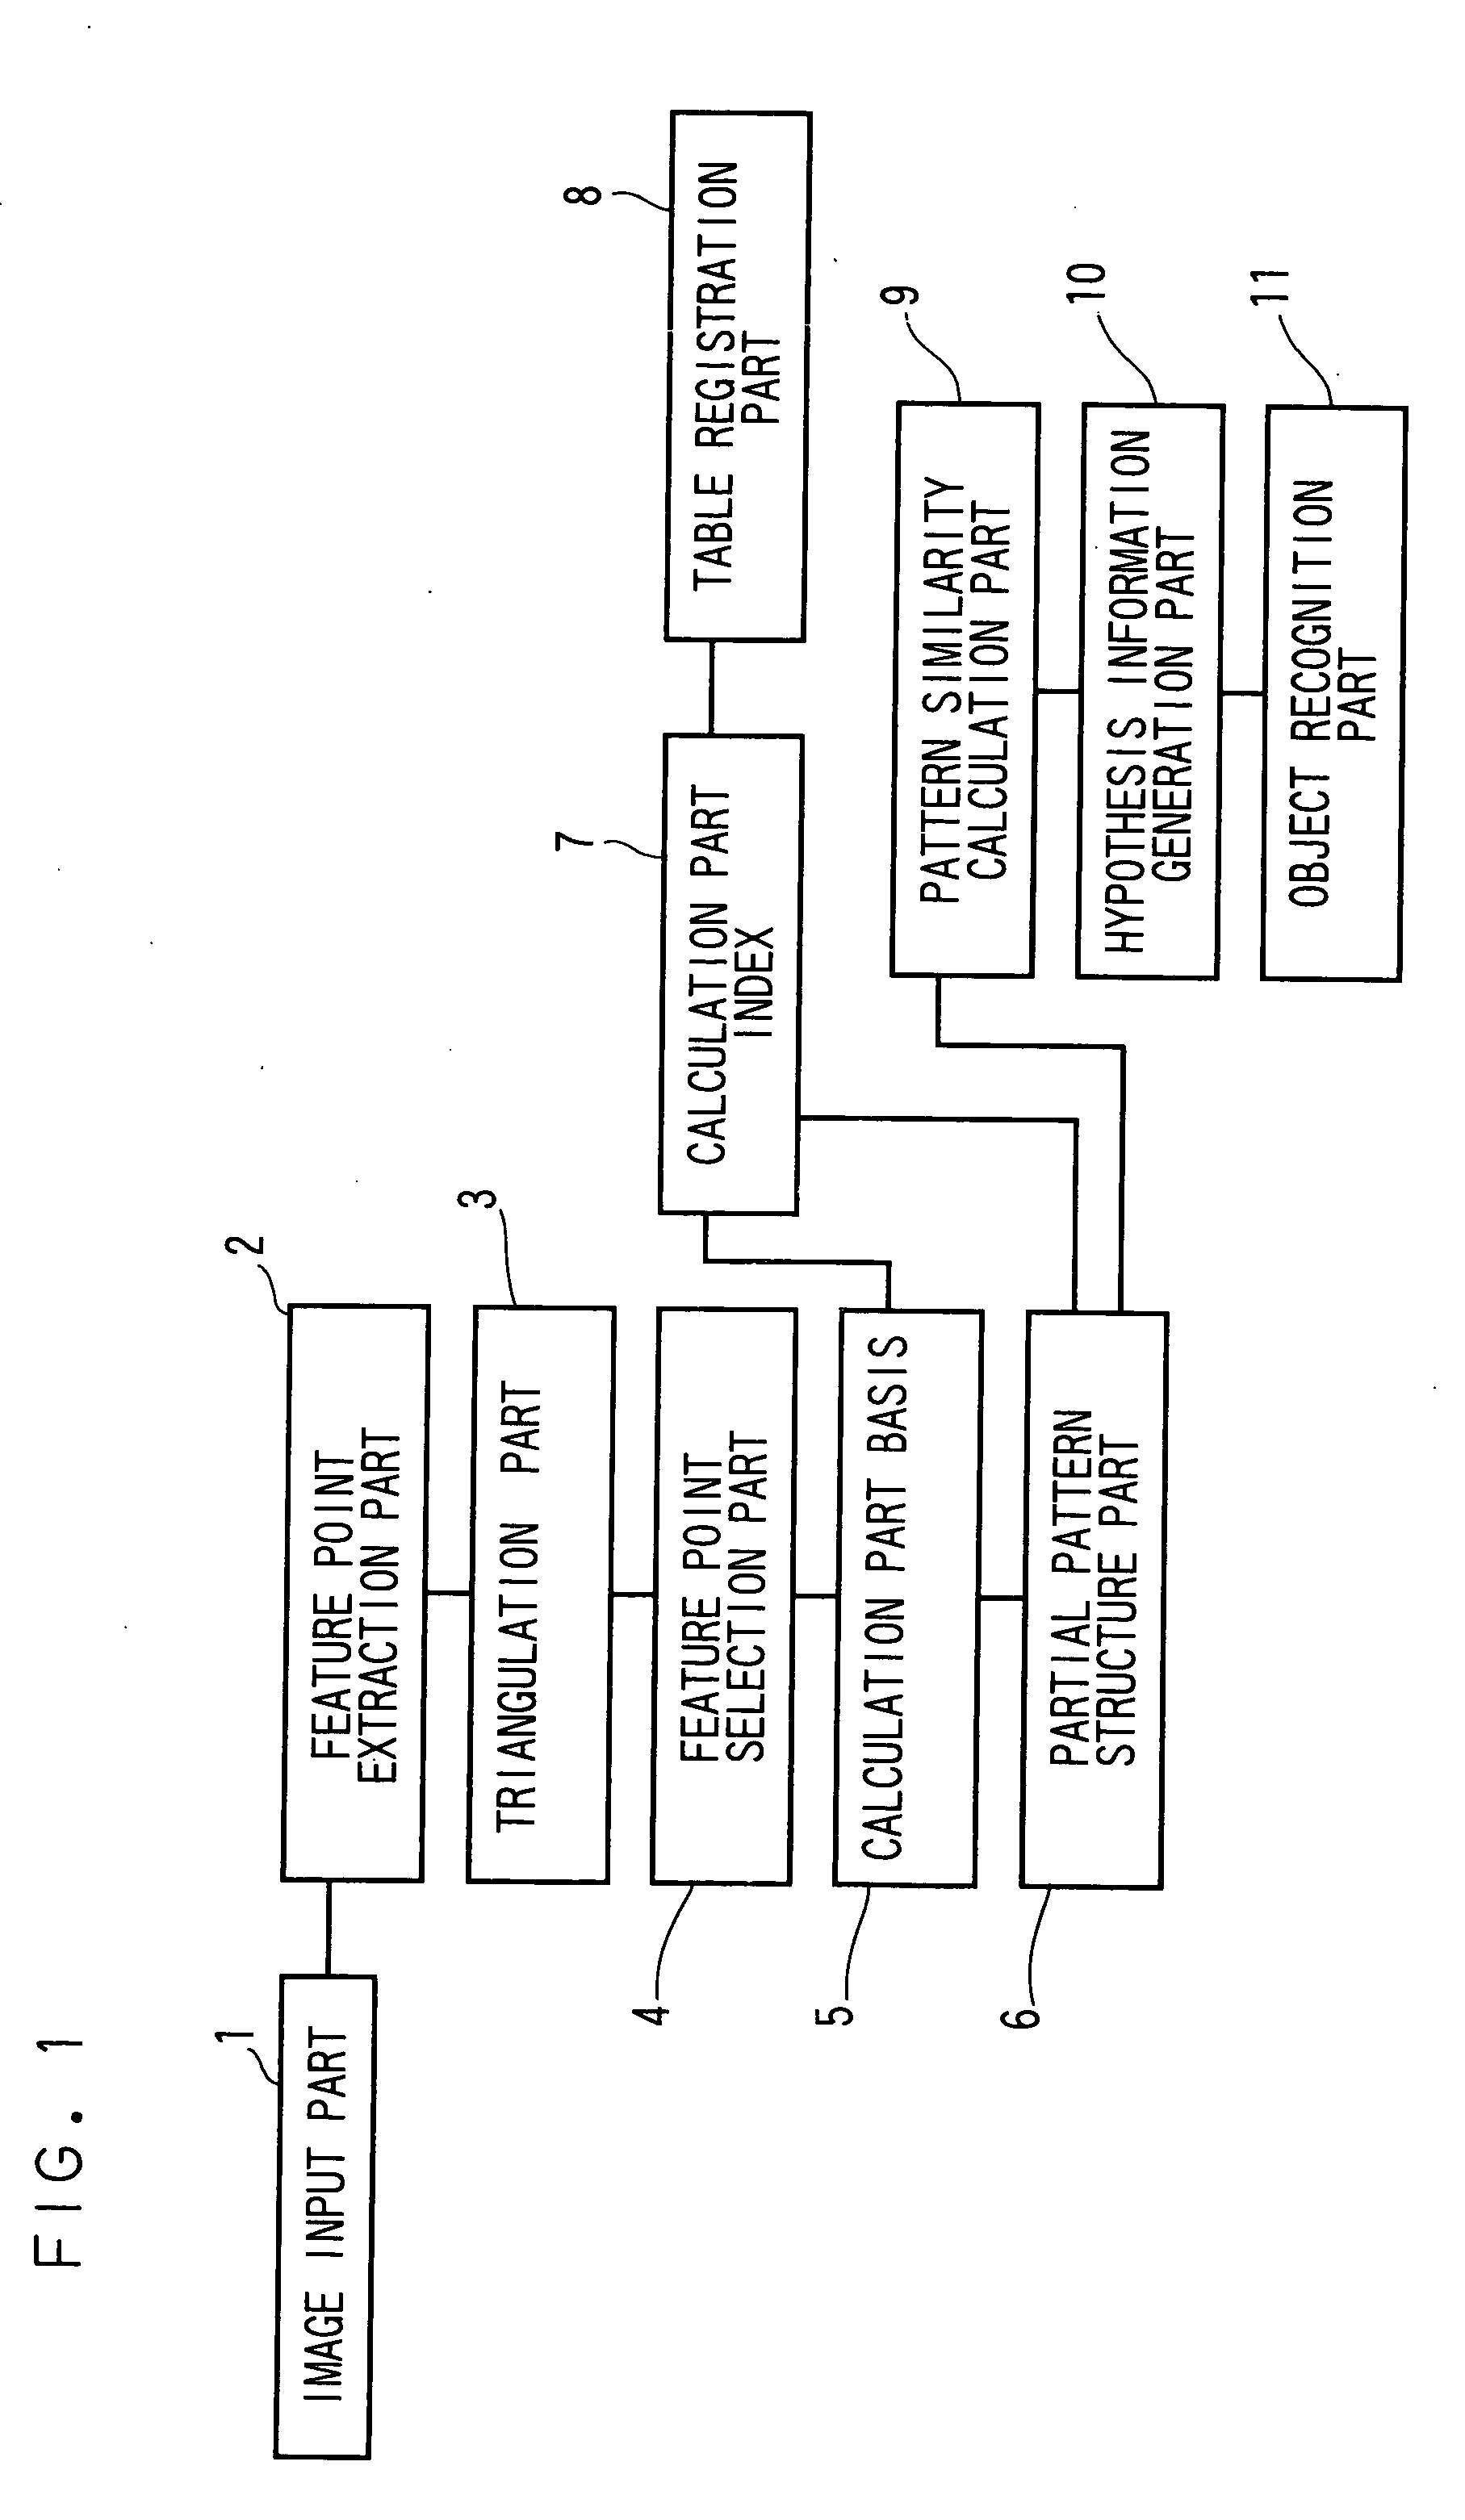 Pattern recognition apparatus and method